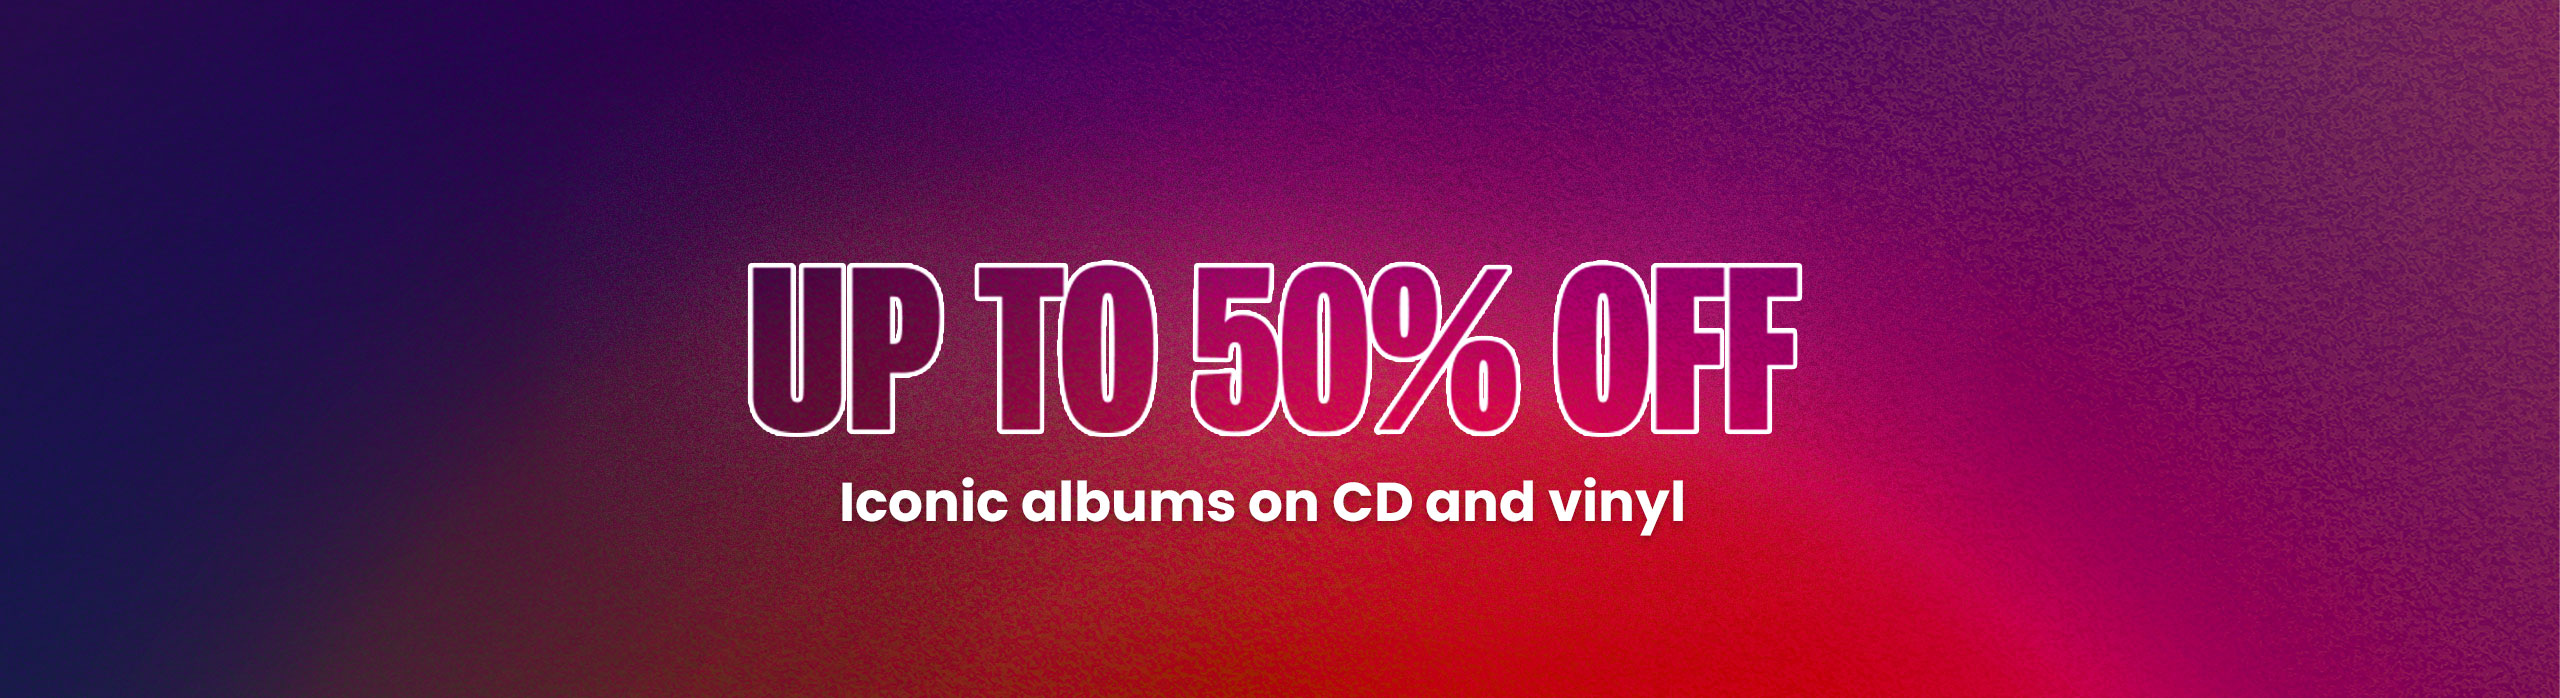 Christmas Sale - Up to 50% iconic albums on CD and vinyl